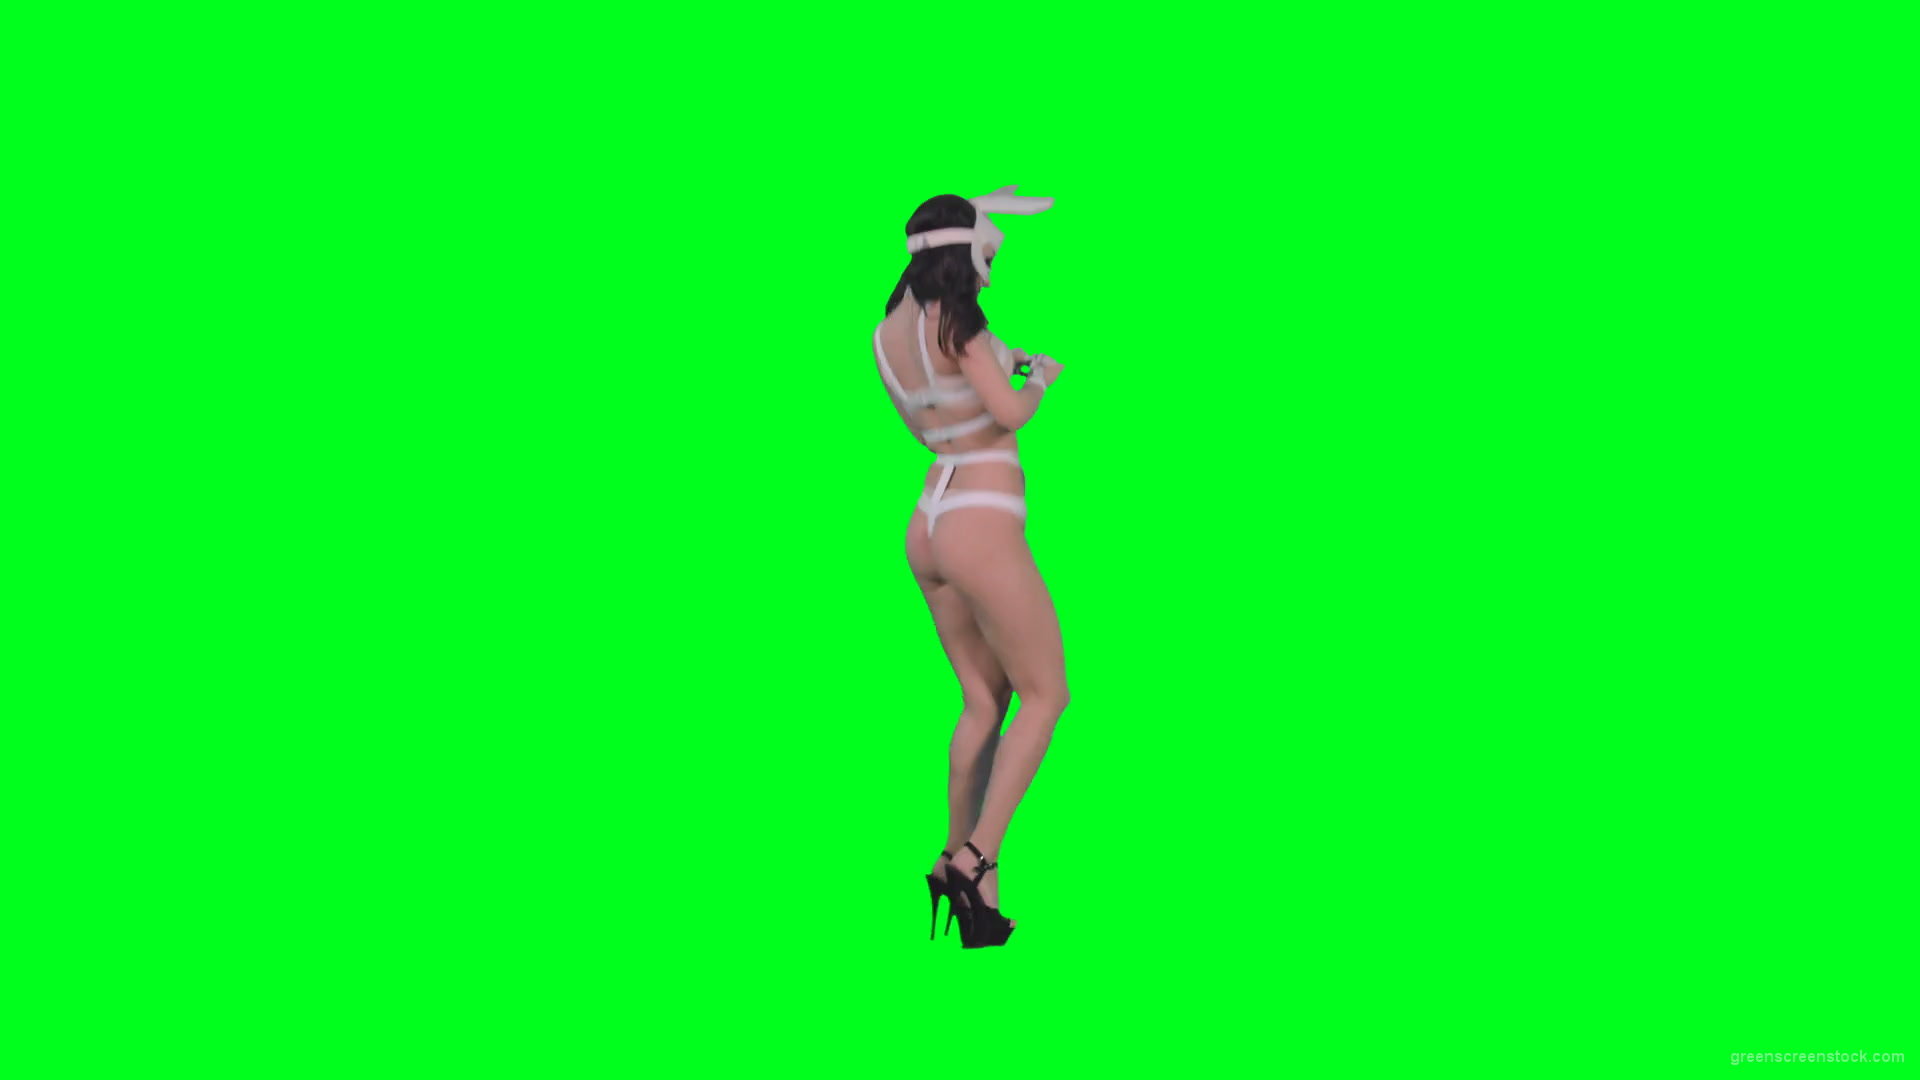 Young-girl-in-rabbit-costume-jumping-and-spinning-on-green-screen-4K-Video-Footage-1920_005 Green Screen Stock